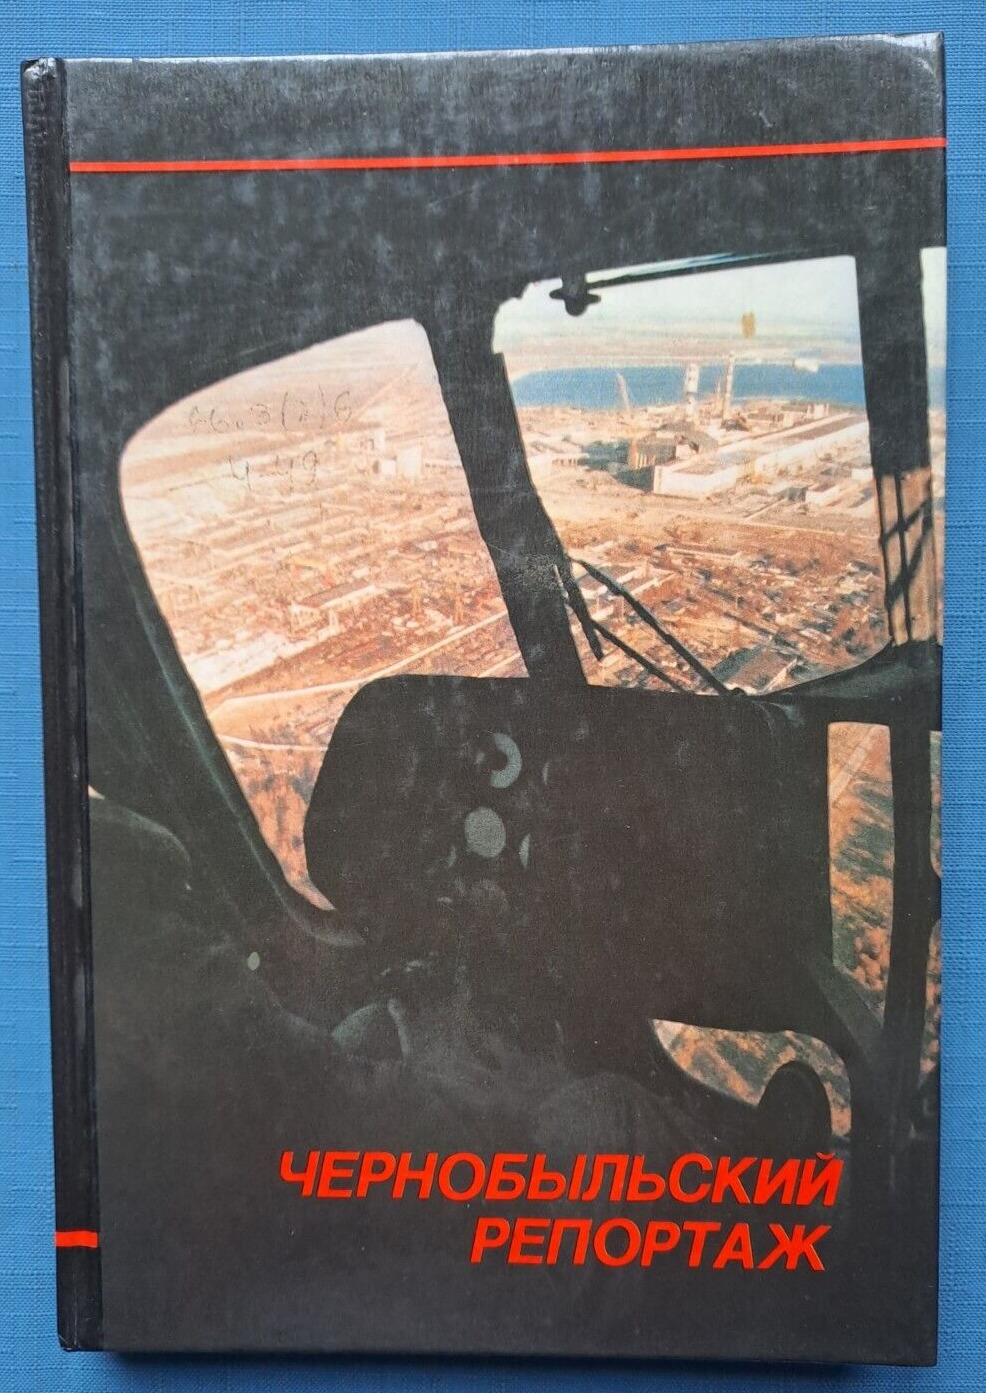 1989 Chernobyl Radiation Nuclear reactor Disaster ChAES Photo Album Russian book